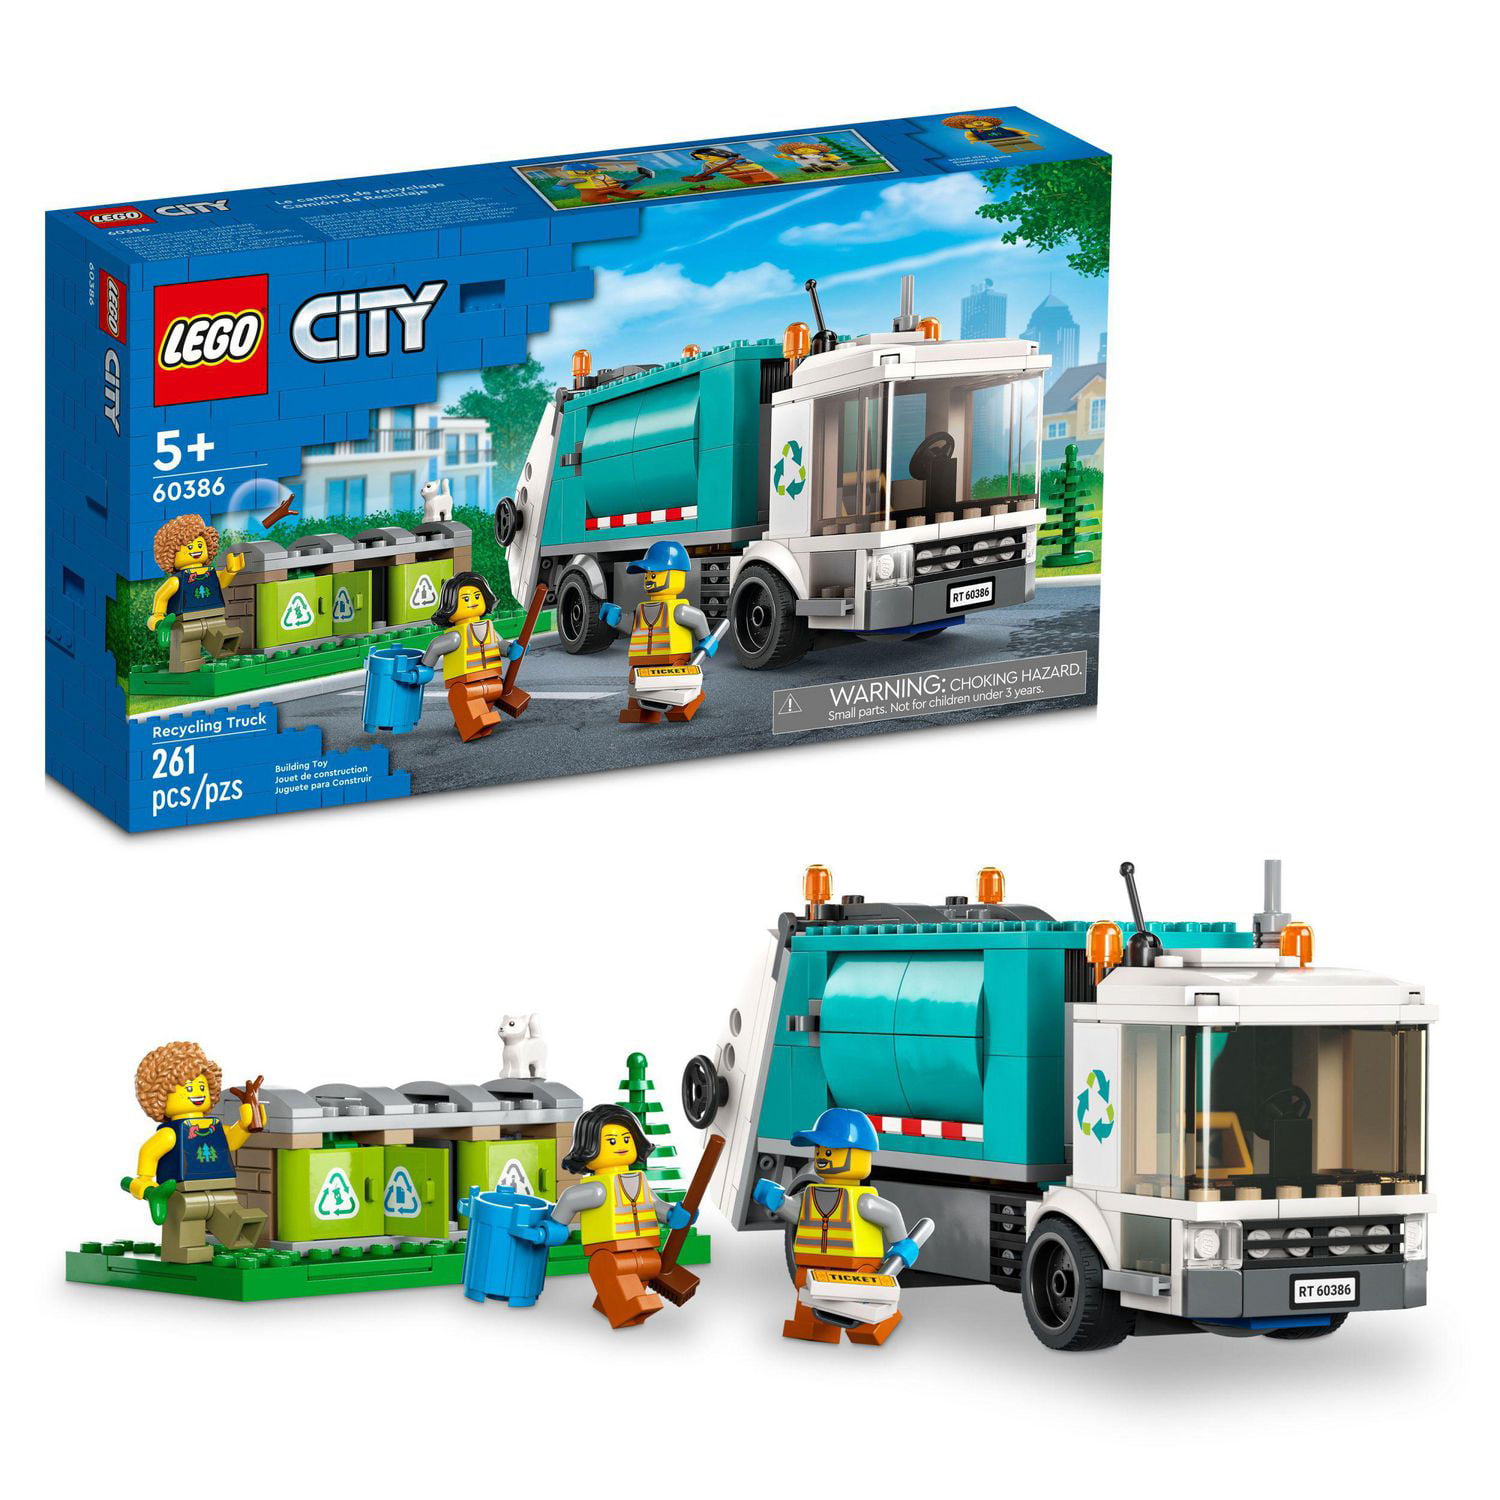 LEGO City Recycling Truck 60386, Toy Vehicle Set with 3 Sorting